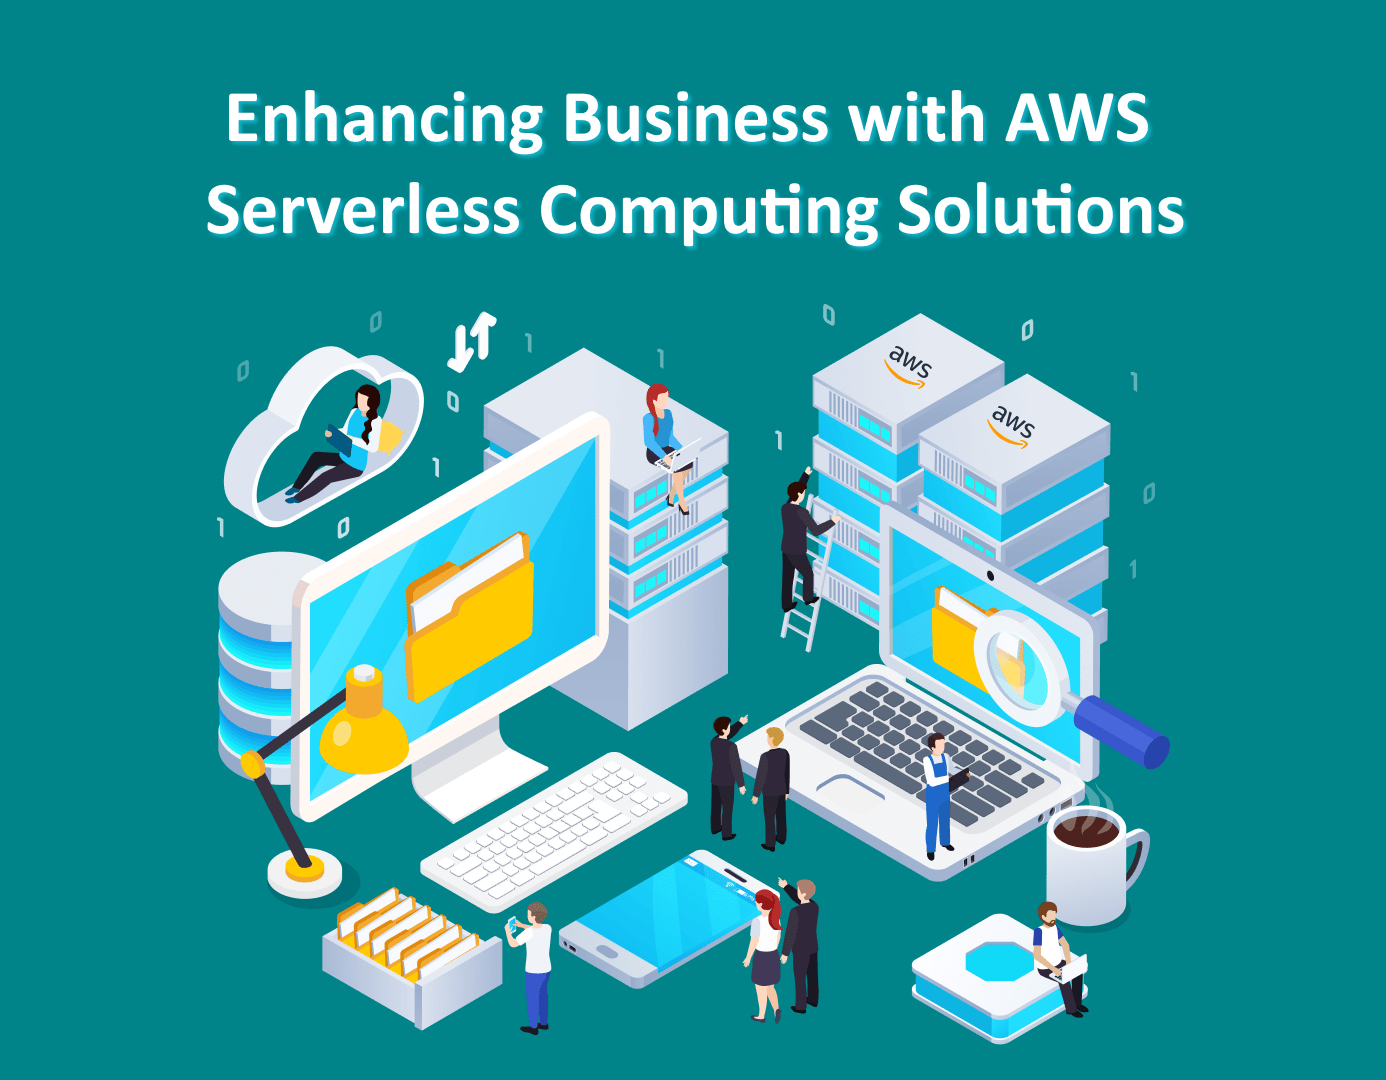 concept of optimizing business with AWS serverless computing solutions, featuring icons and graphics related to cloud technology and business growth.